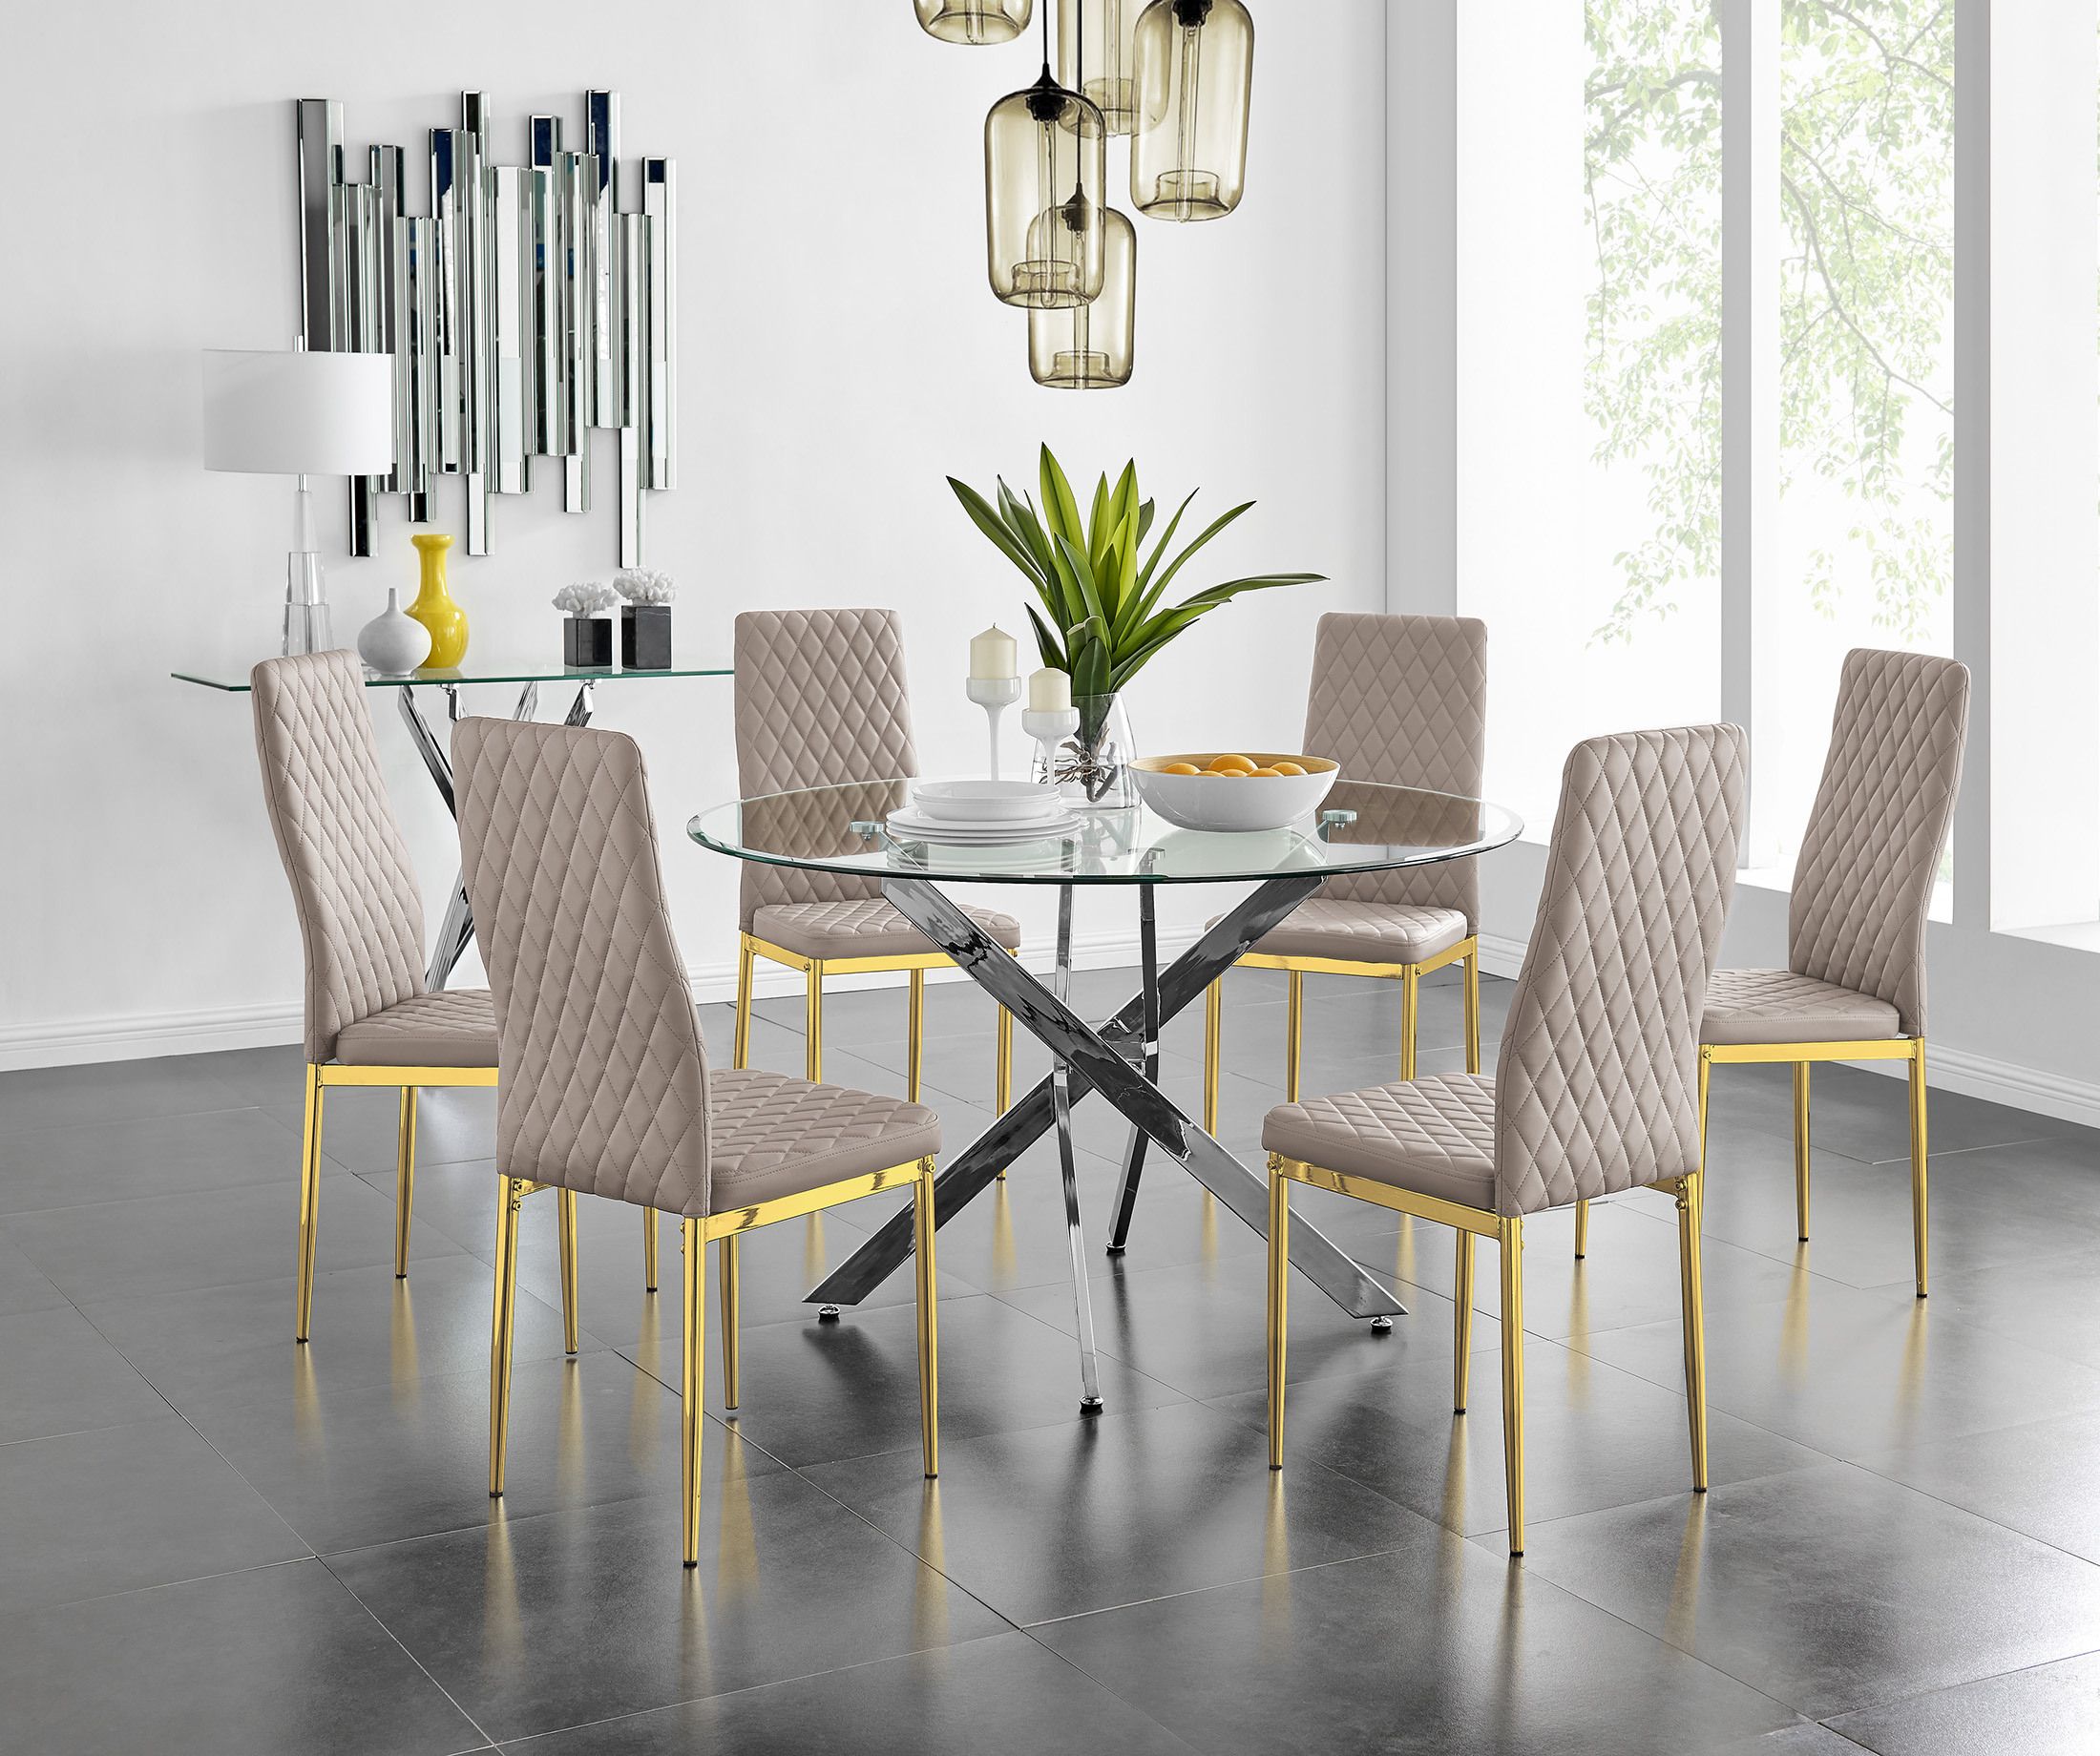 120Cm Round Dining Table & 6 Gold Leg Chairs | Furniturebox With Most Popular Gold Dining Tables (View 10 of 15)